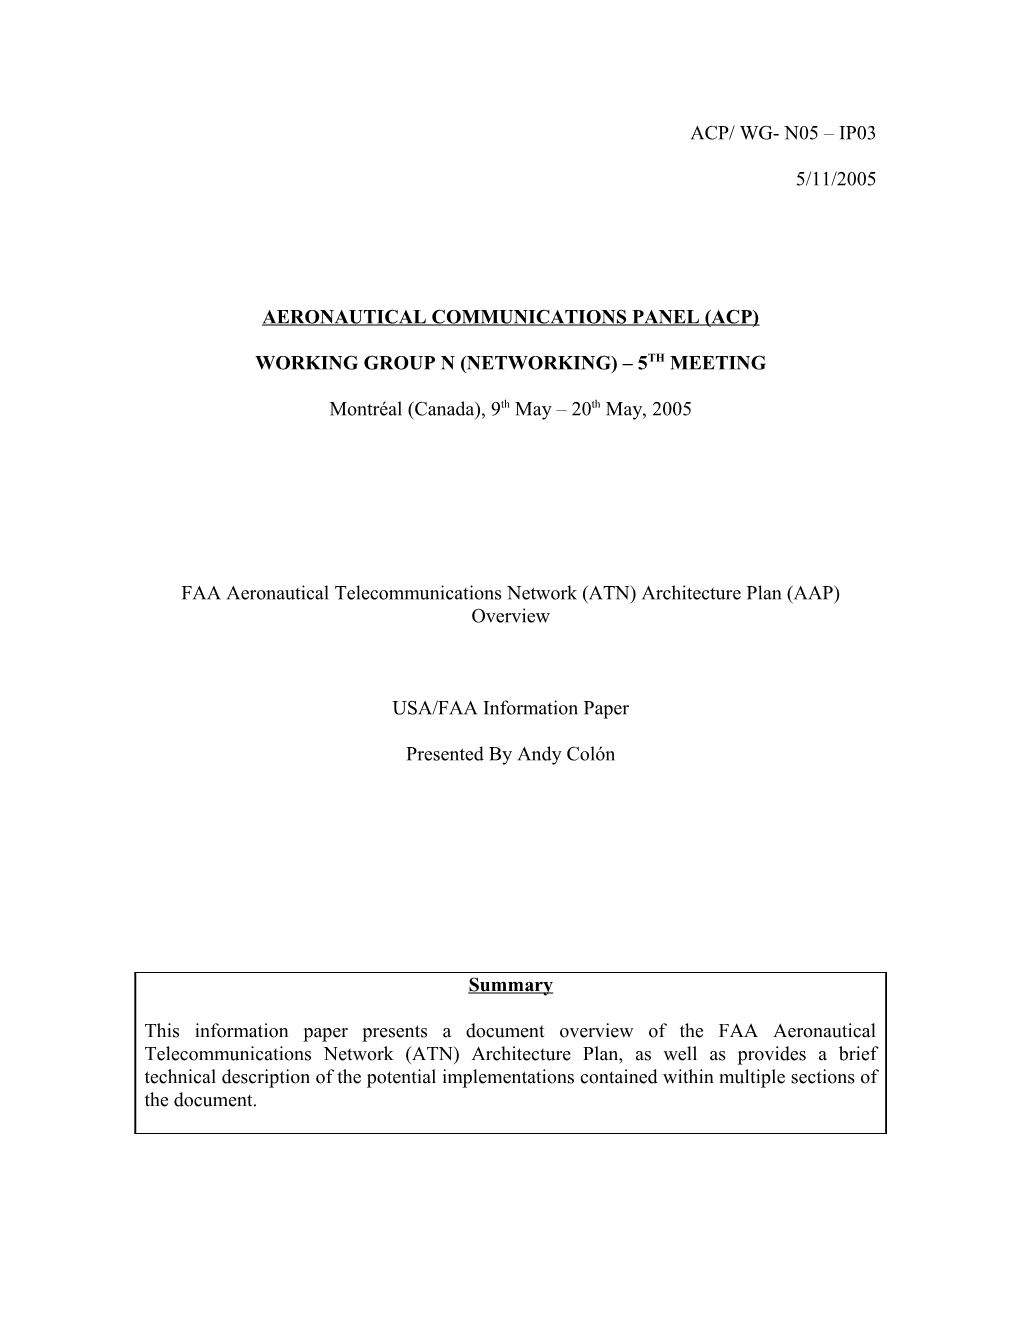 FAA Aeronautical Telecommunications Network (ATN) Architecture Plan (AAP) Overview